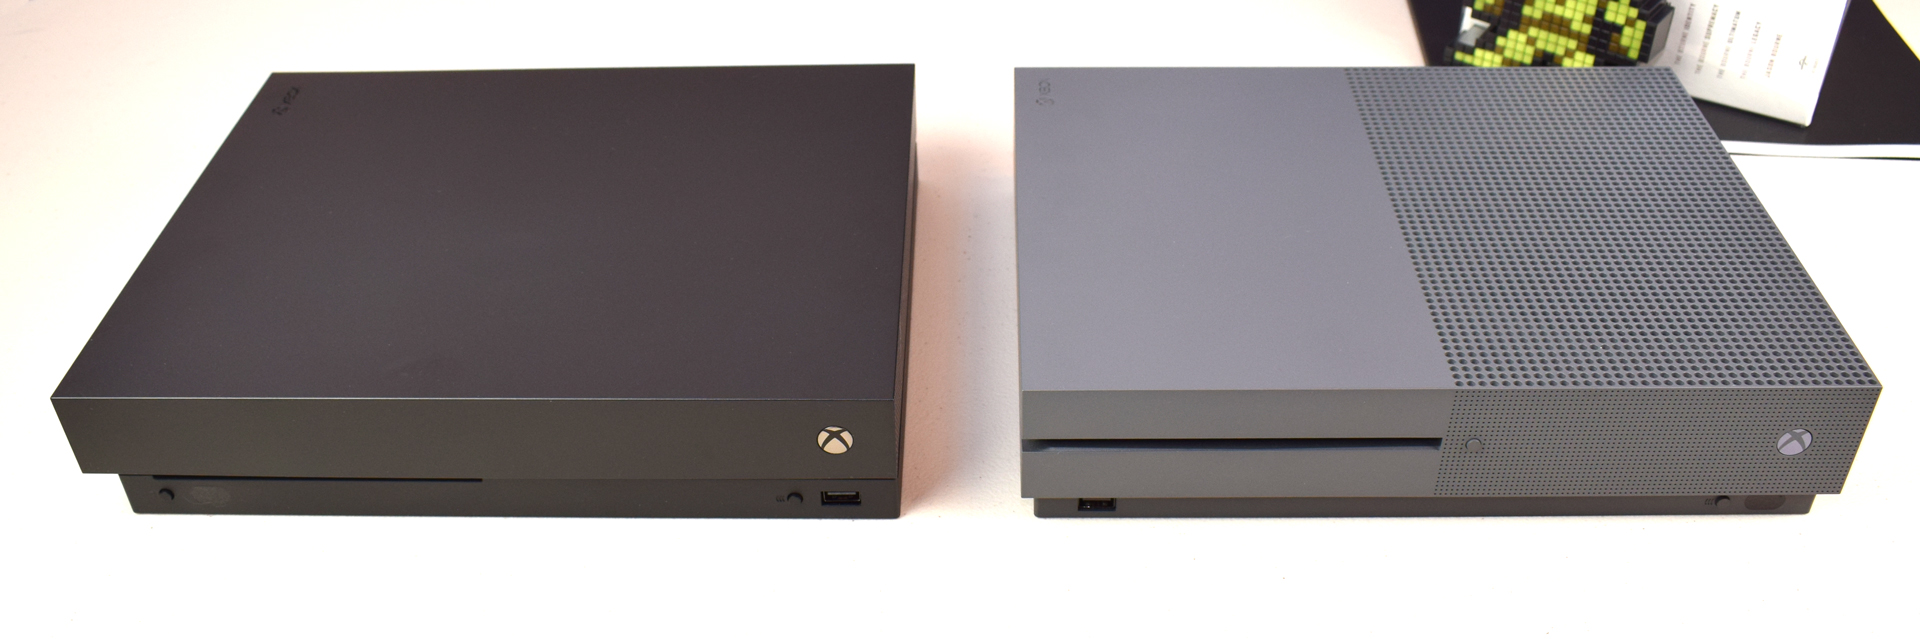 which one is better xbox one x or xbox one s